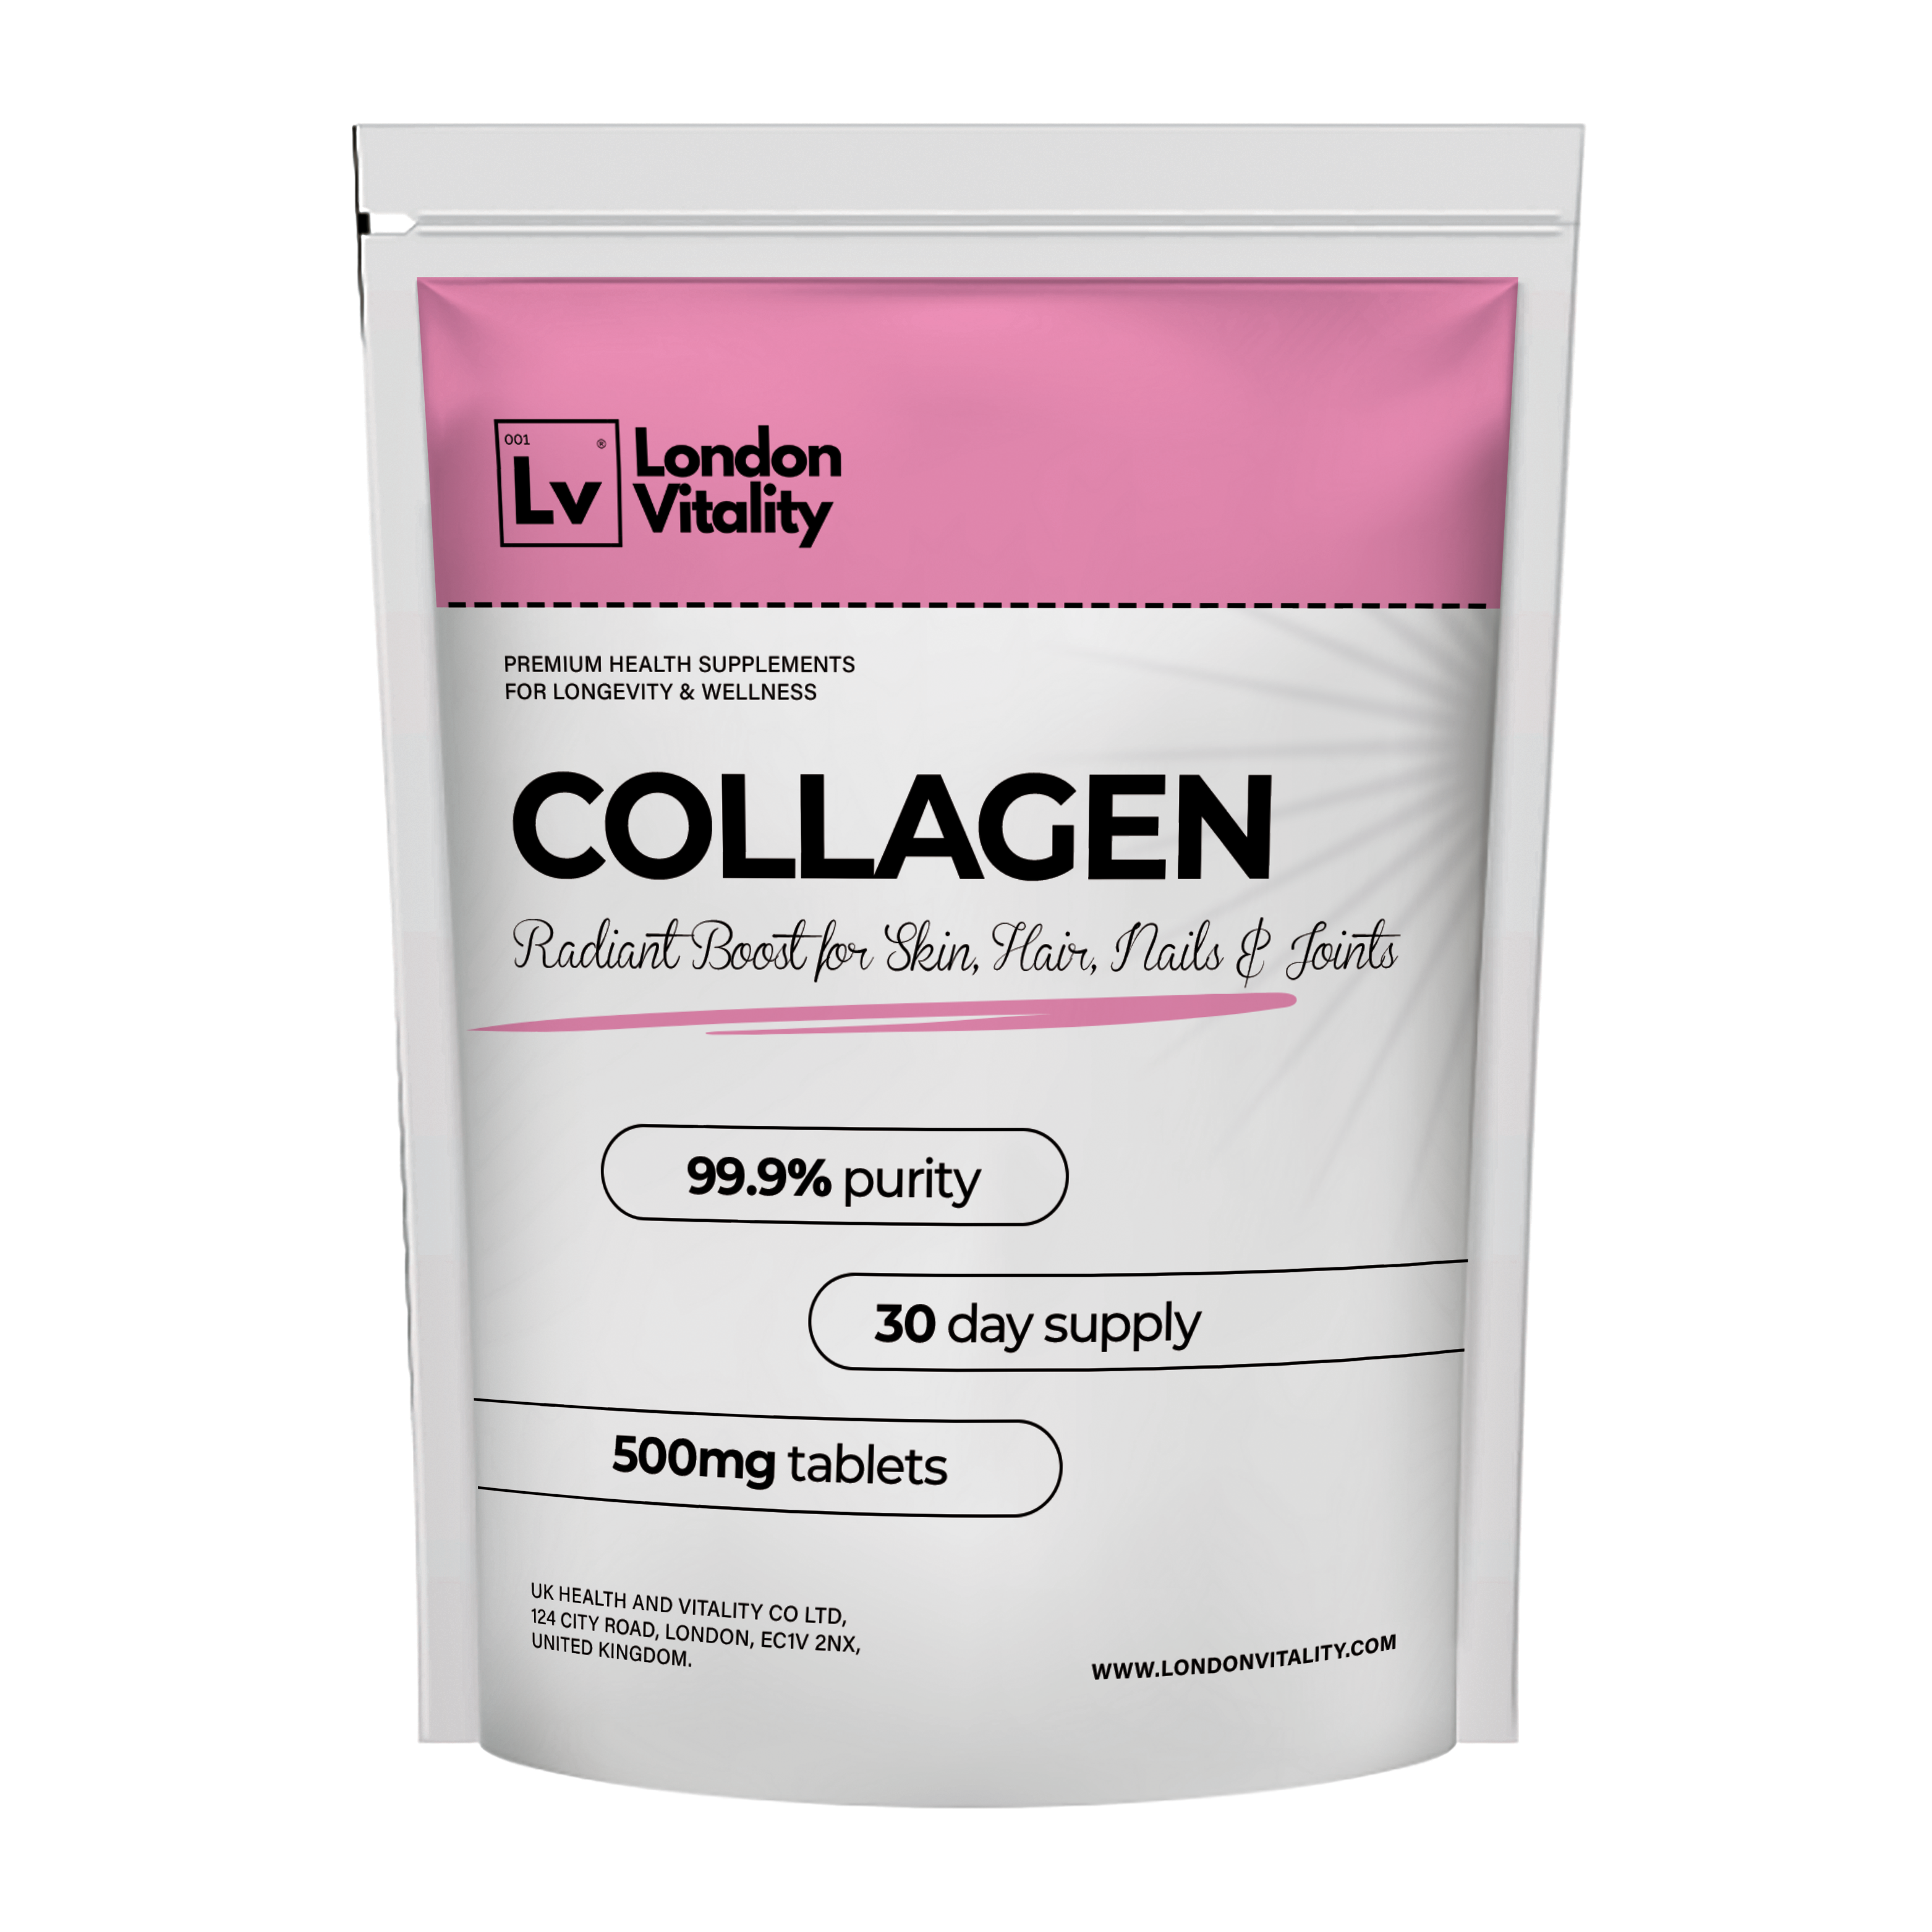 Marine Collagen: Radiant Boost for Skin, Hair, Nails & Joints